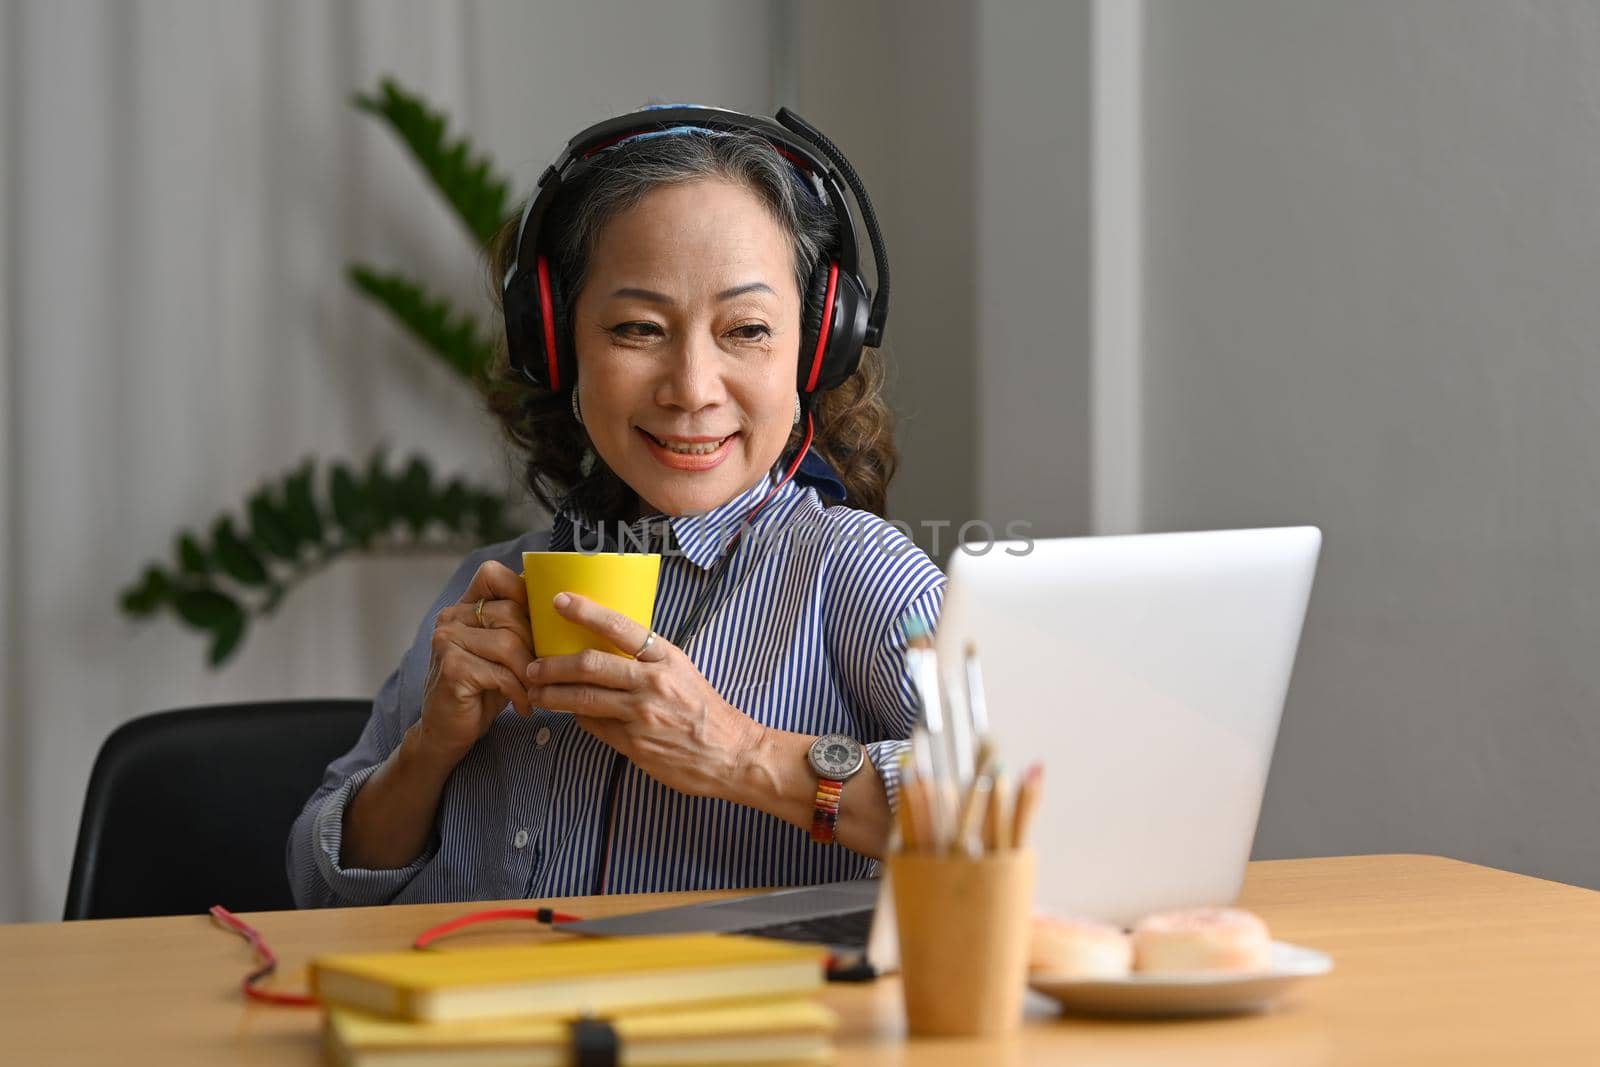 Smiling middle aged woman wearing headphone watching online webinar on laptop computer at home kitchen.